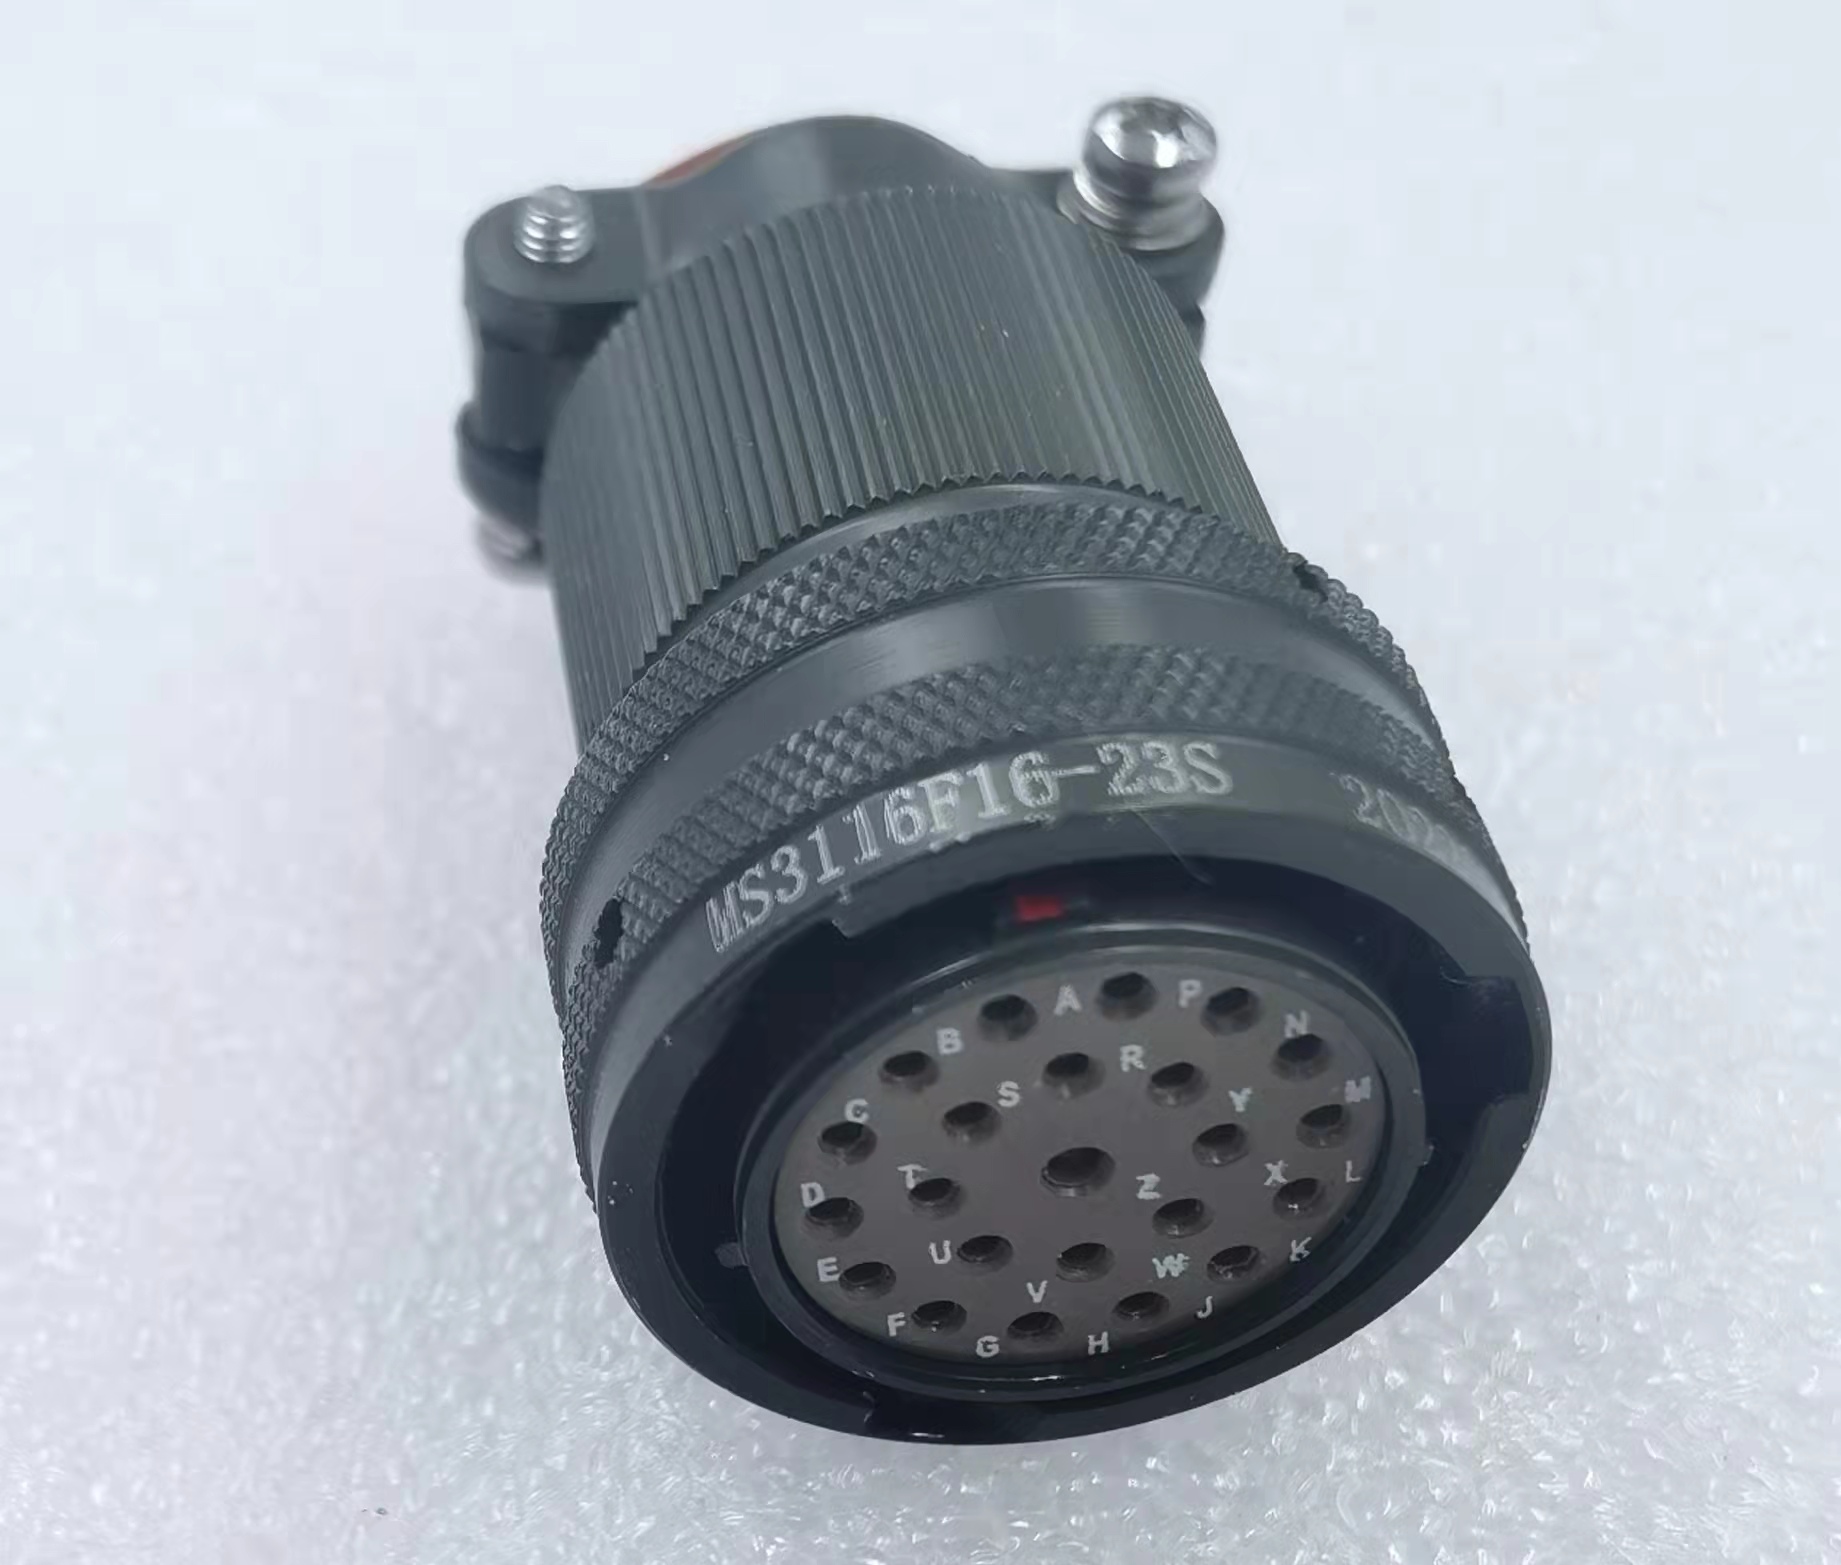 MS3116F16-23p industrial military connector female 23pin circular connector IP68